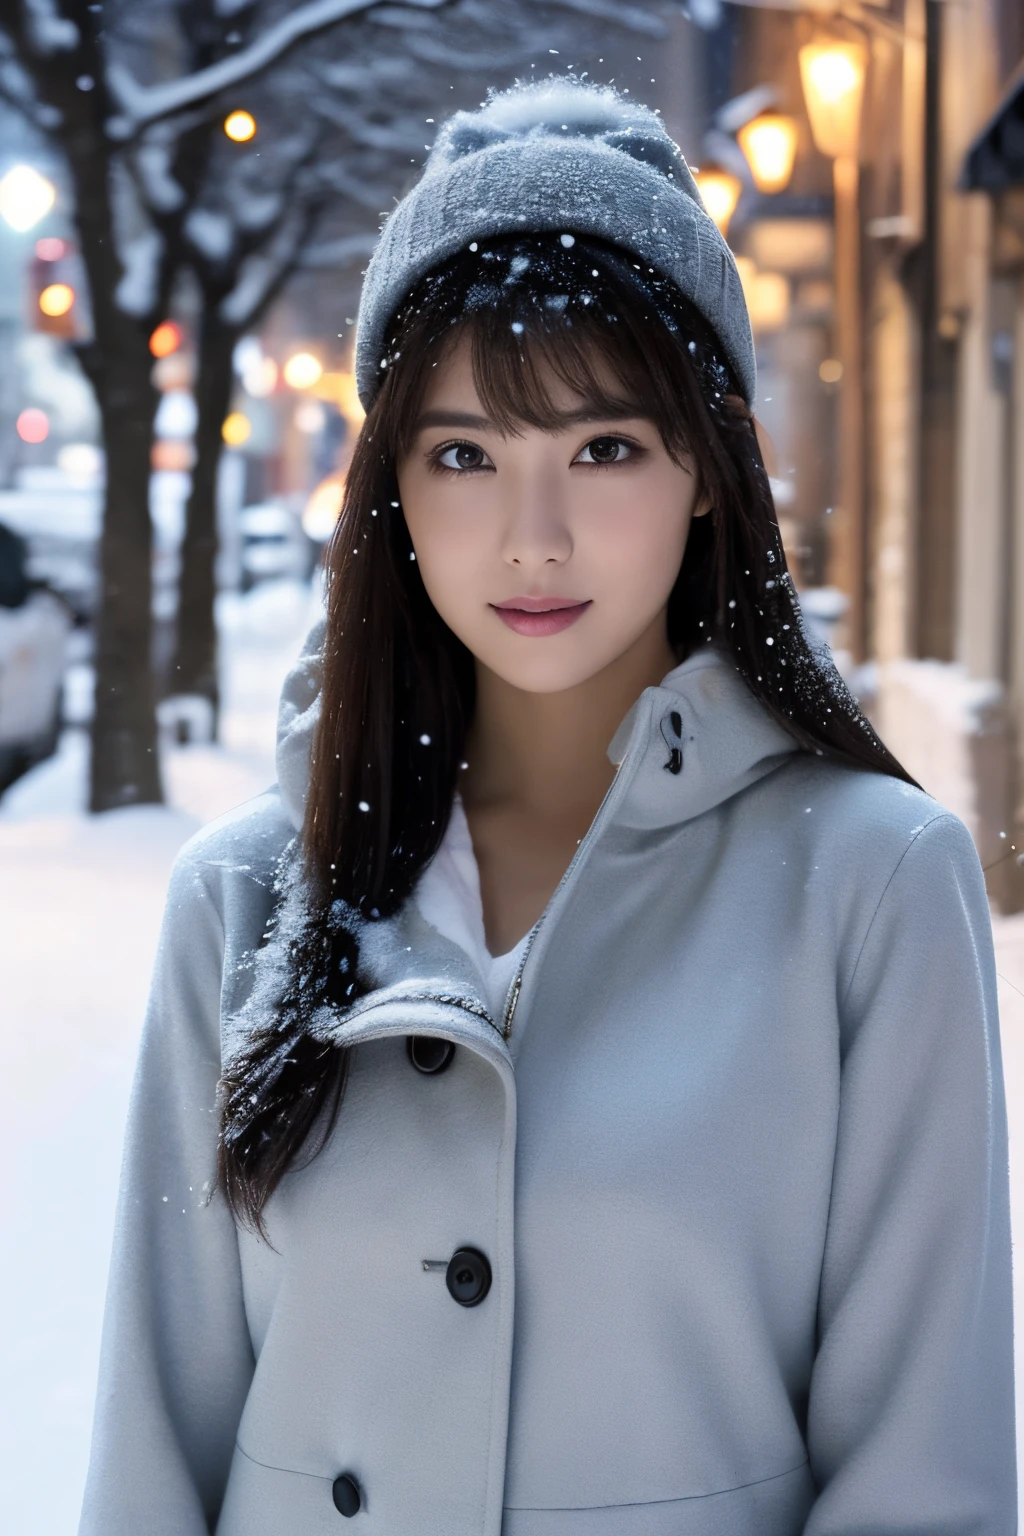 1girl in, (wear a platinum coat:1.2), (Raw photo, Best Quality), (Realistic, Photorealsitic:1.4), masutepiece, Extremely delicate and beautiful, Extremely detailed, 2k wallpaper, amazing, finely detail, the Extremely Detailed CG Unity 8K Wallpapers, Ultra-detailed, hight resolution, Soft light, Beautiful detailed girl, extremely detailed eye and face, beautiful detailed nose, Beautiful detailed eyes, Cinematic lighting, Illuminations coloring the city on a snowy night, (Illumination of street trees covered with snow like frost-covered trees:1.4), Snowy landscape, It's snowing, There&#39;There&#39;There&#39;There&#39;There&#39;There&#39;s snow in my hair, Perfect Anatomy, Slender body, Taut, 
Straight semi-long hair, Bangs, Looking at Viewer, A slight smil